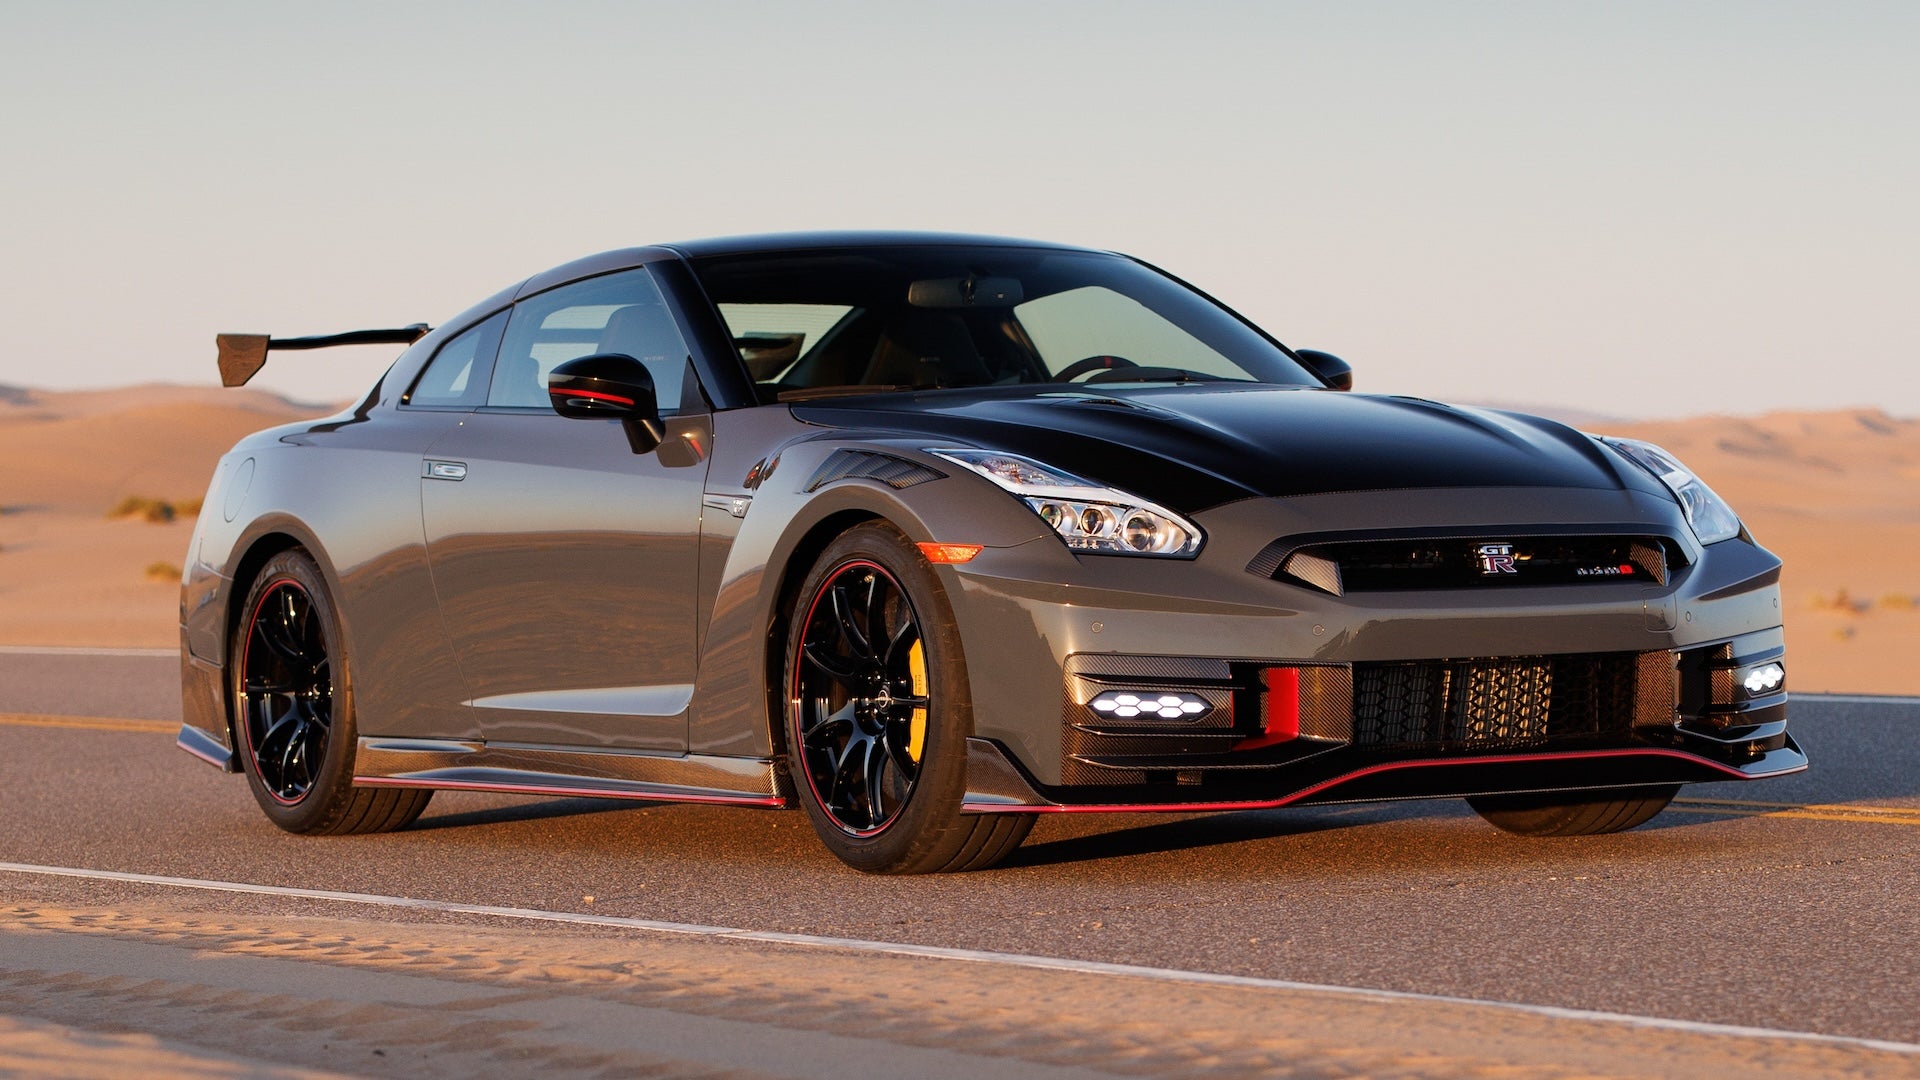 During the last quarter, Nissan only managed to sell an average of one GT-R per day.